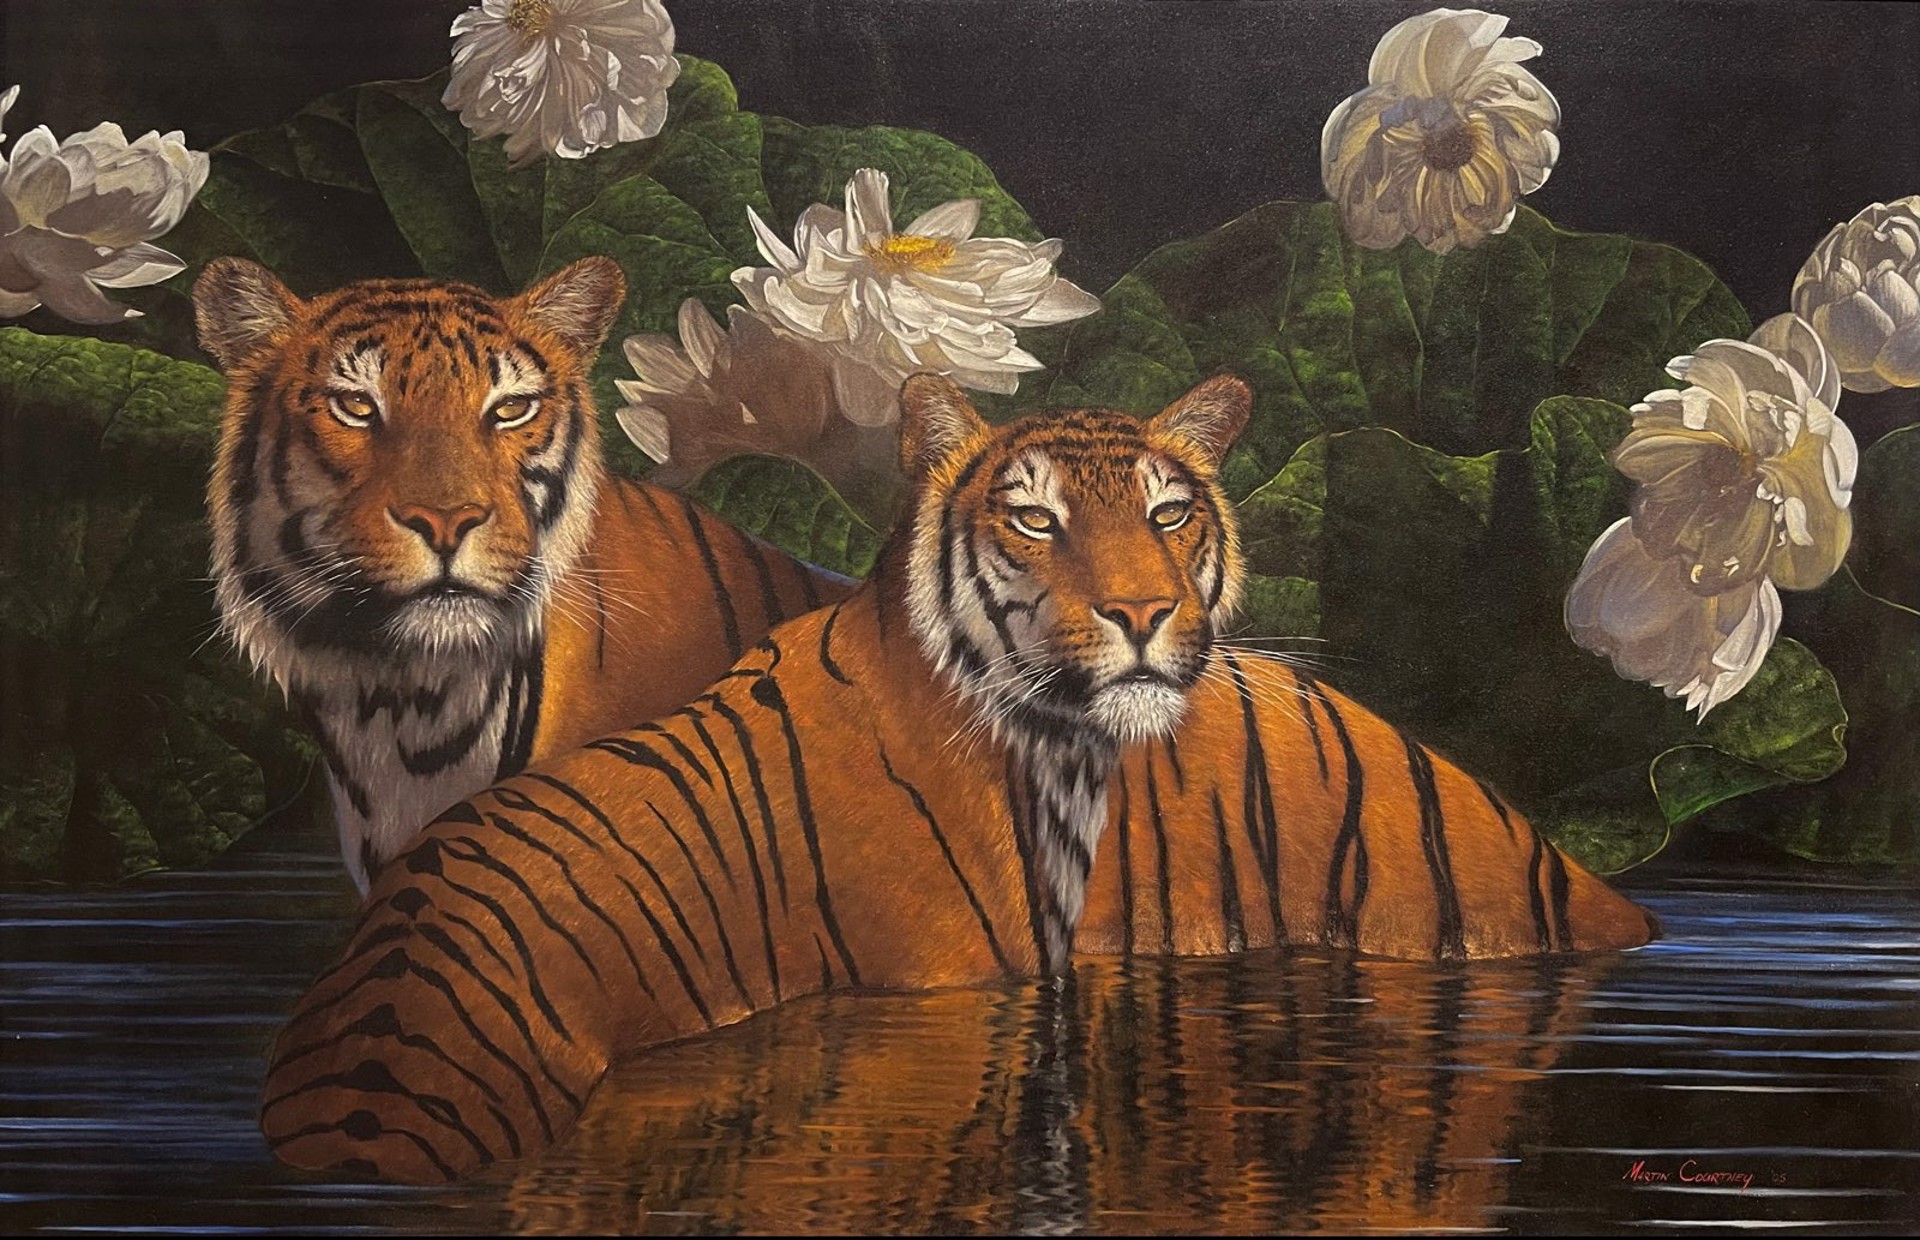 Reflection of Tigers by Martin Courtney